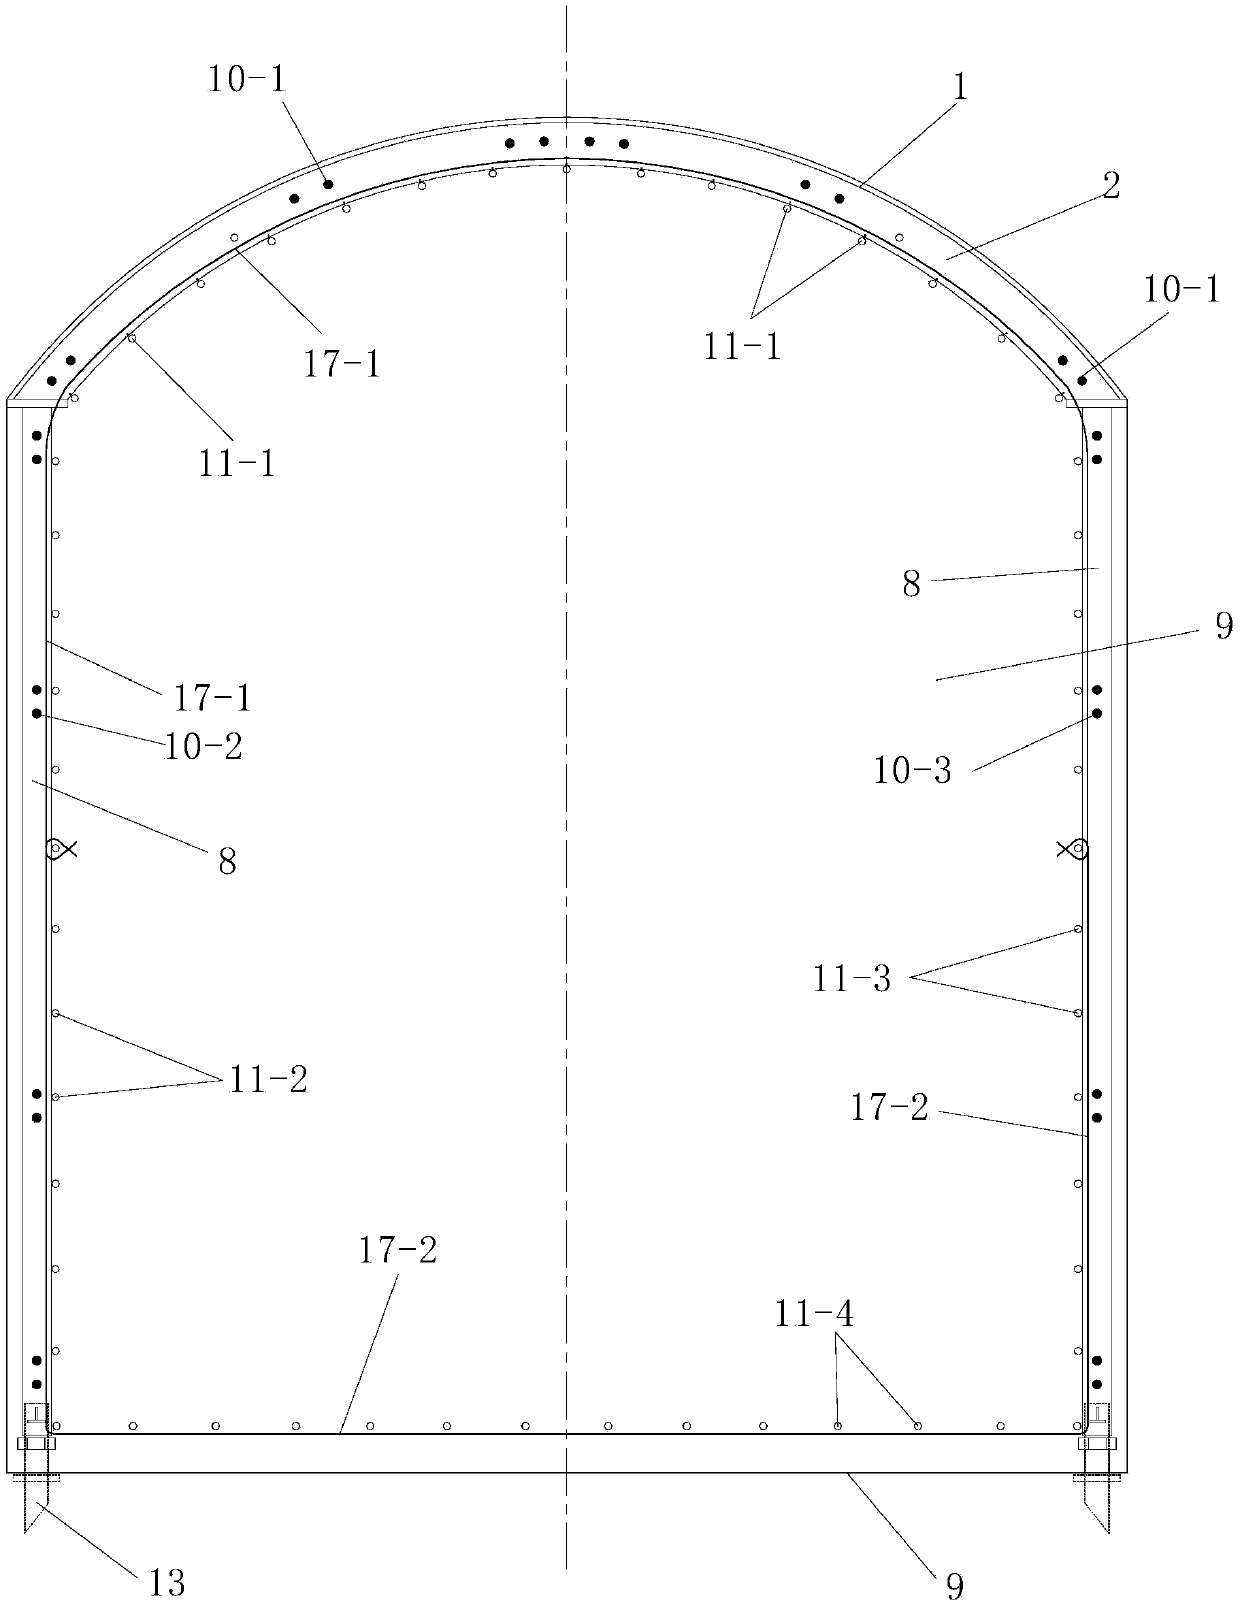 Supporting and bar-arranging structure for arch bridge raking pile hole forming construction